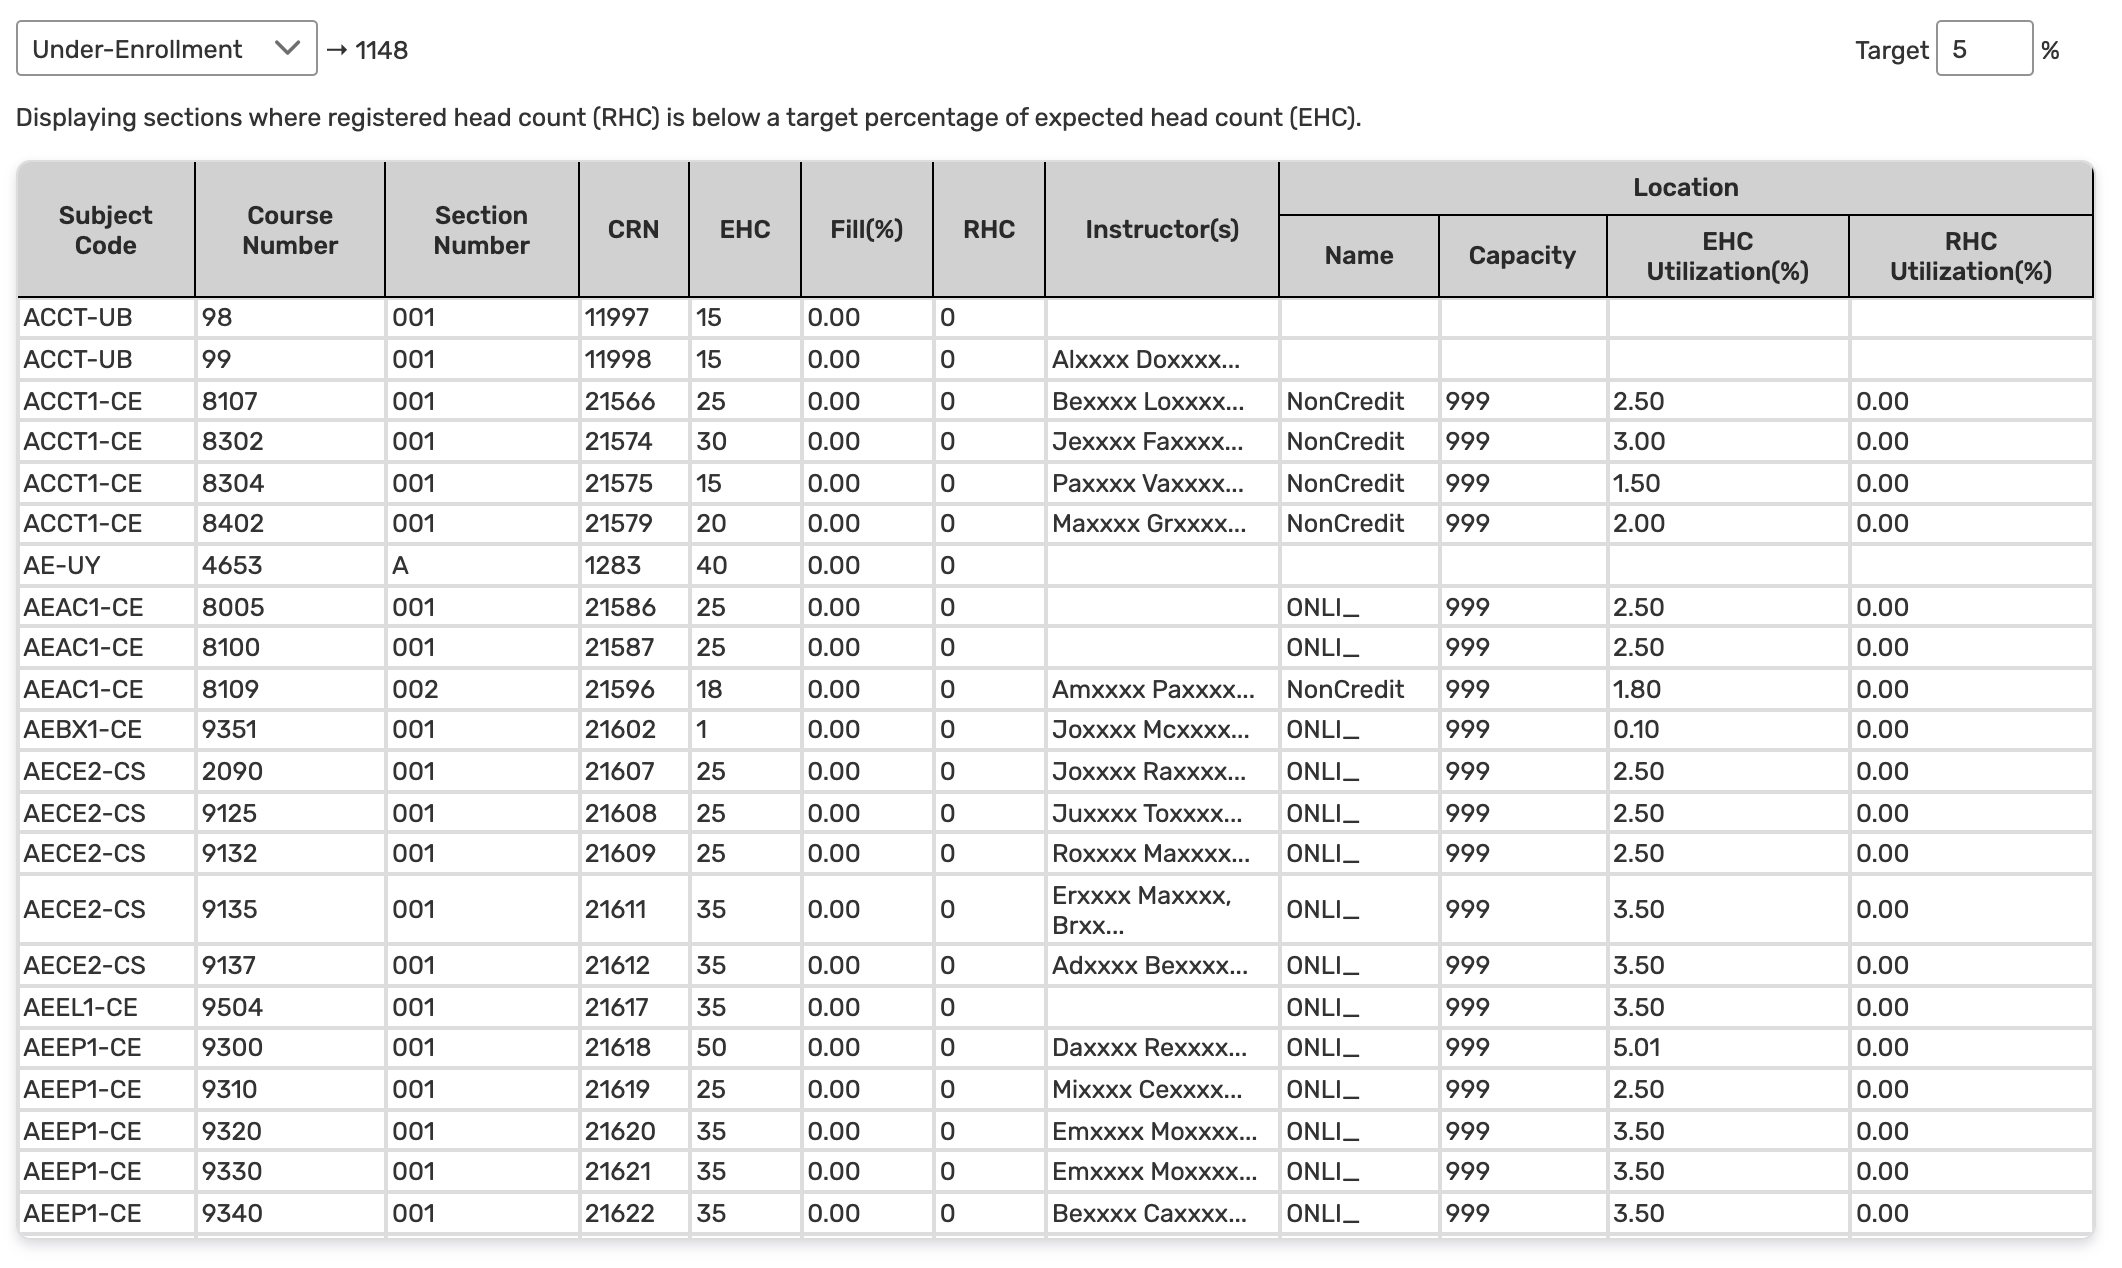 Screenshot of a table of section data, with miscellaneous details on each row